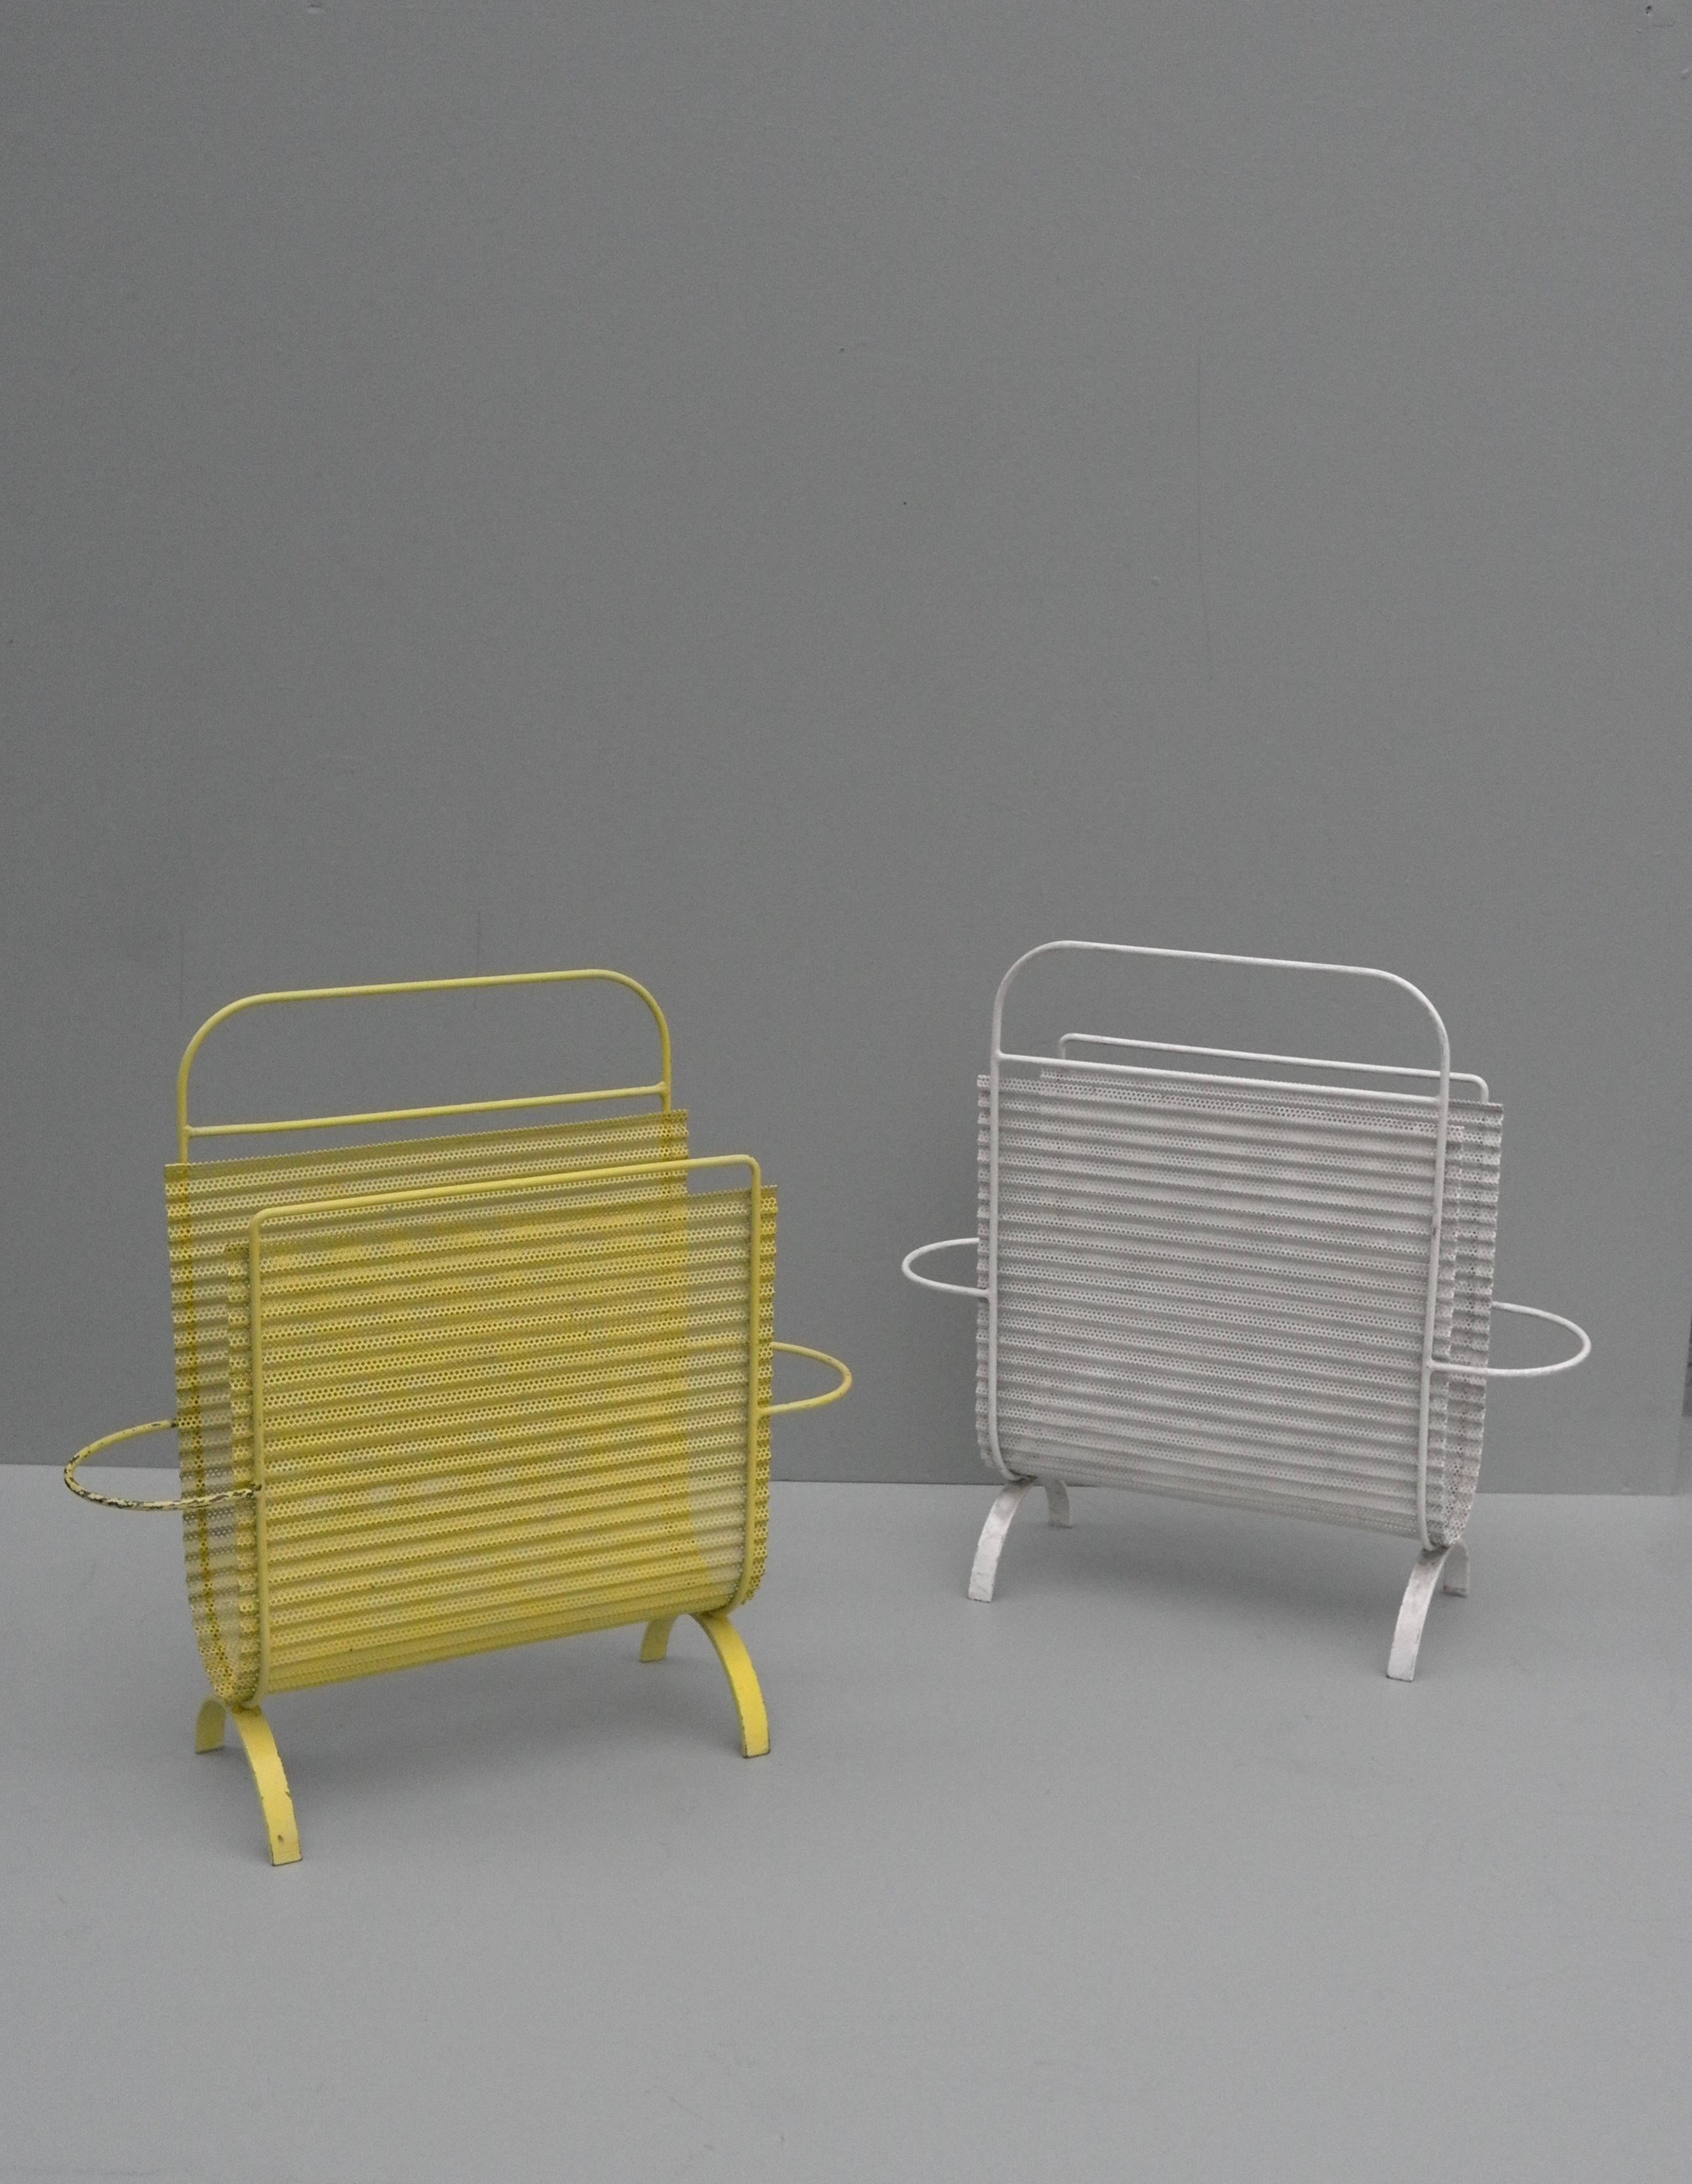 Mathieu Matégot Folded Yellow and White Metal Magazine Holders, France 1950s For Sale 3